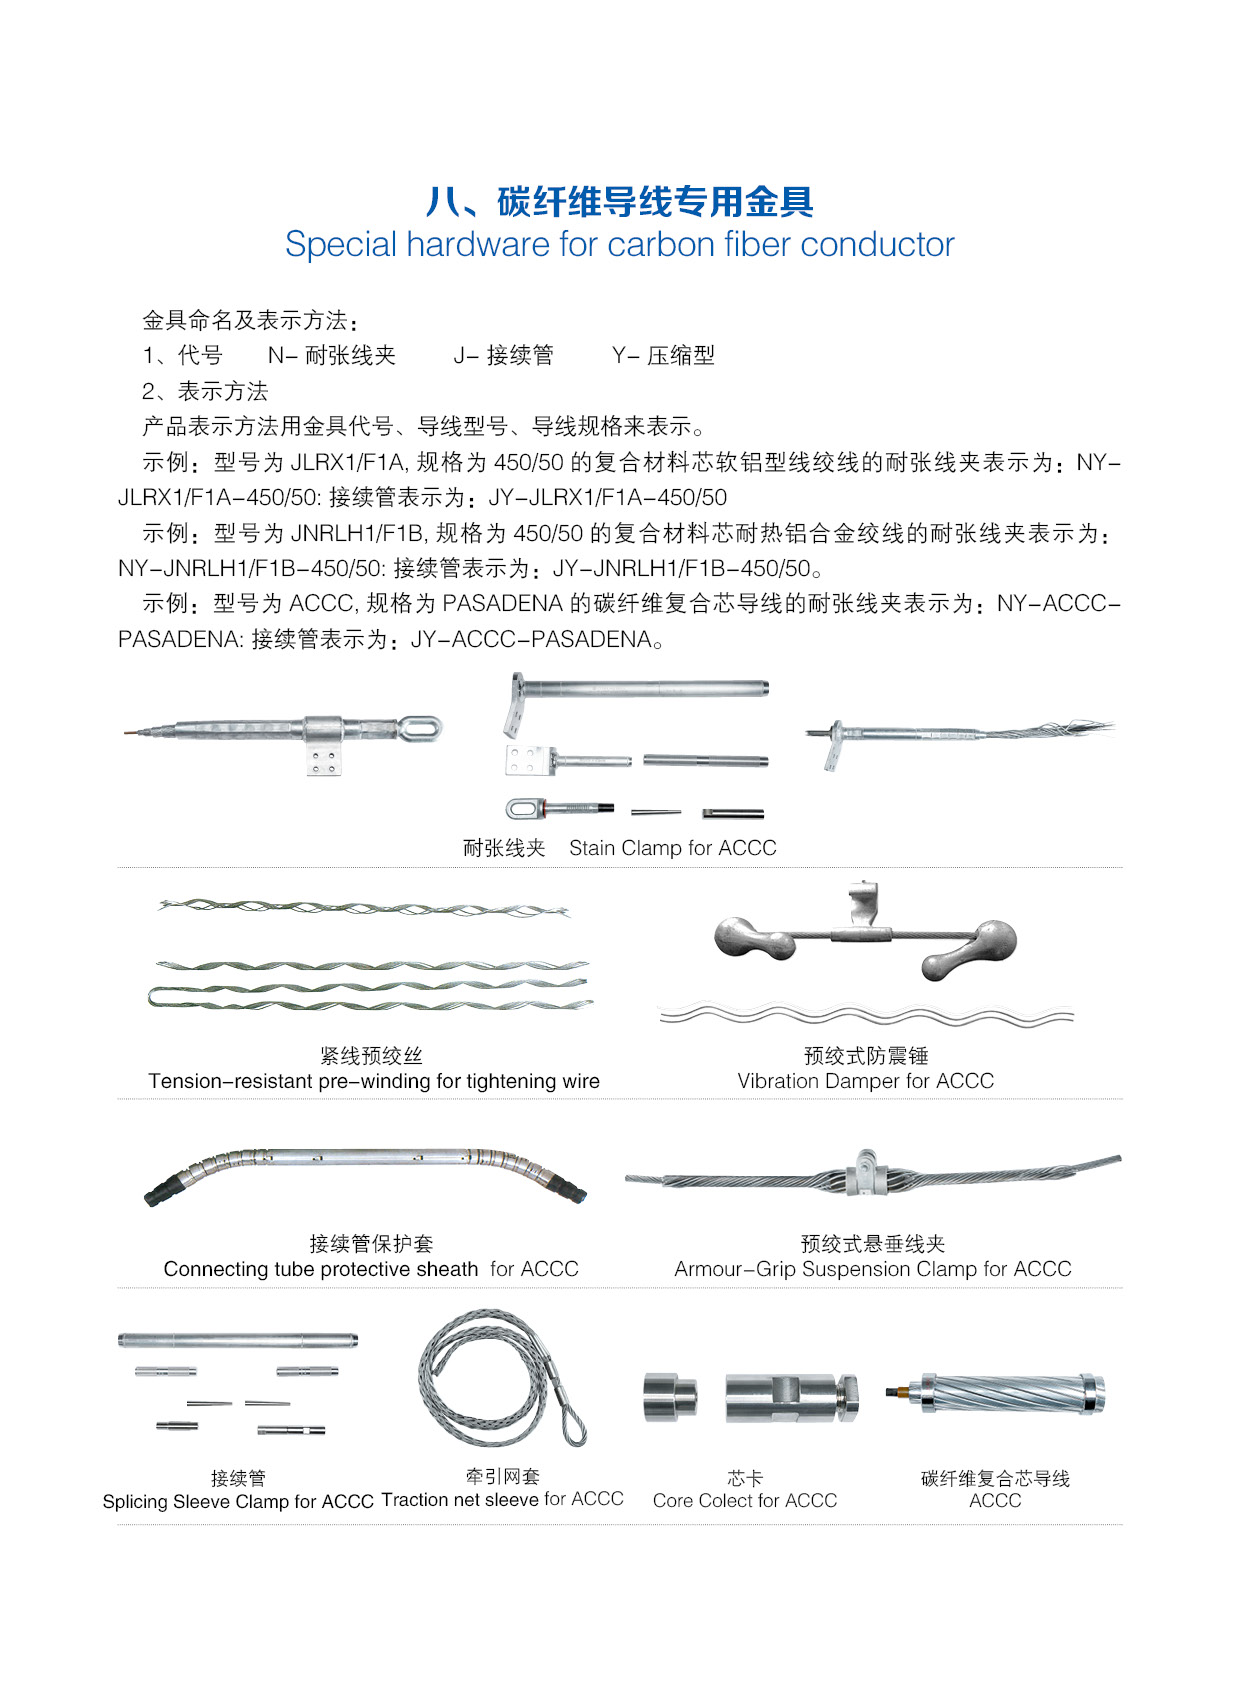 SPECIAL HARDWARE FOR CARBON FIBER CONDUCTOR